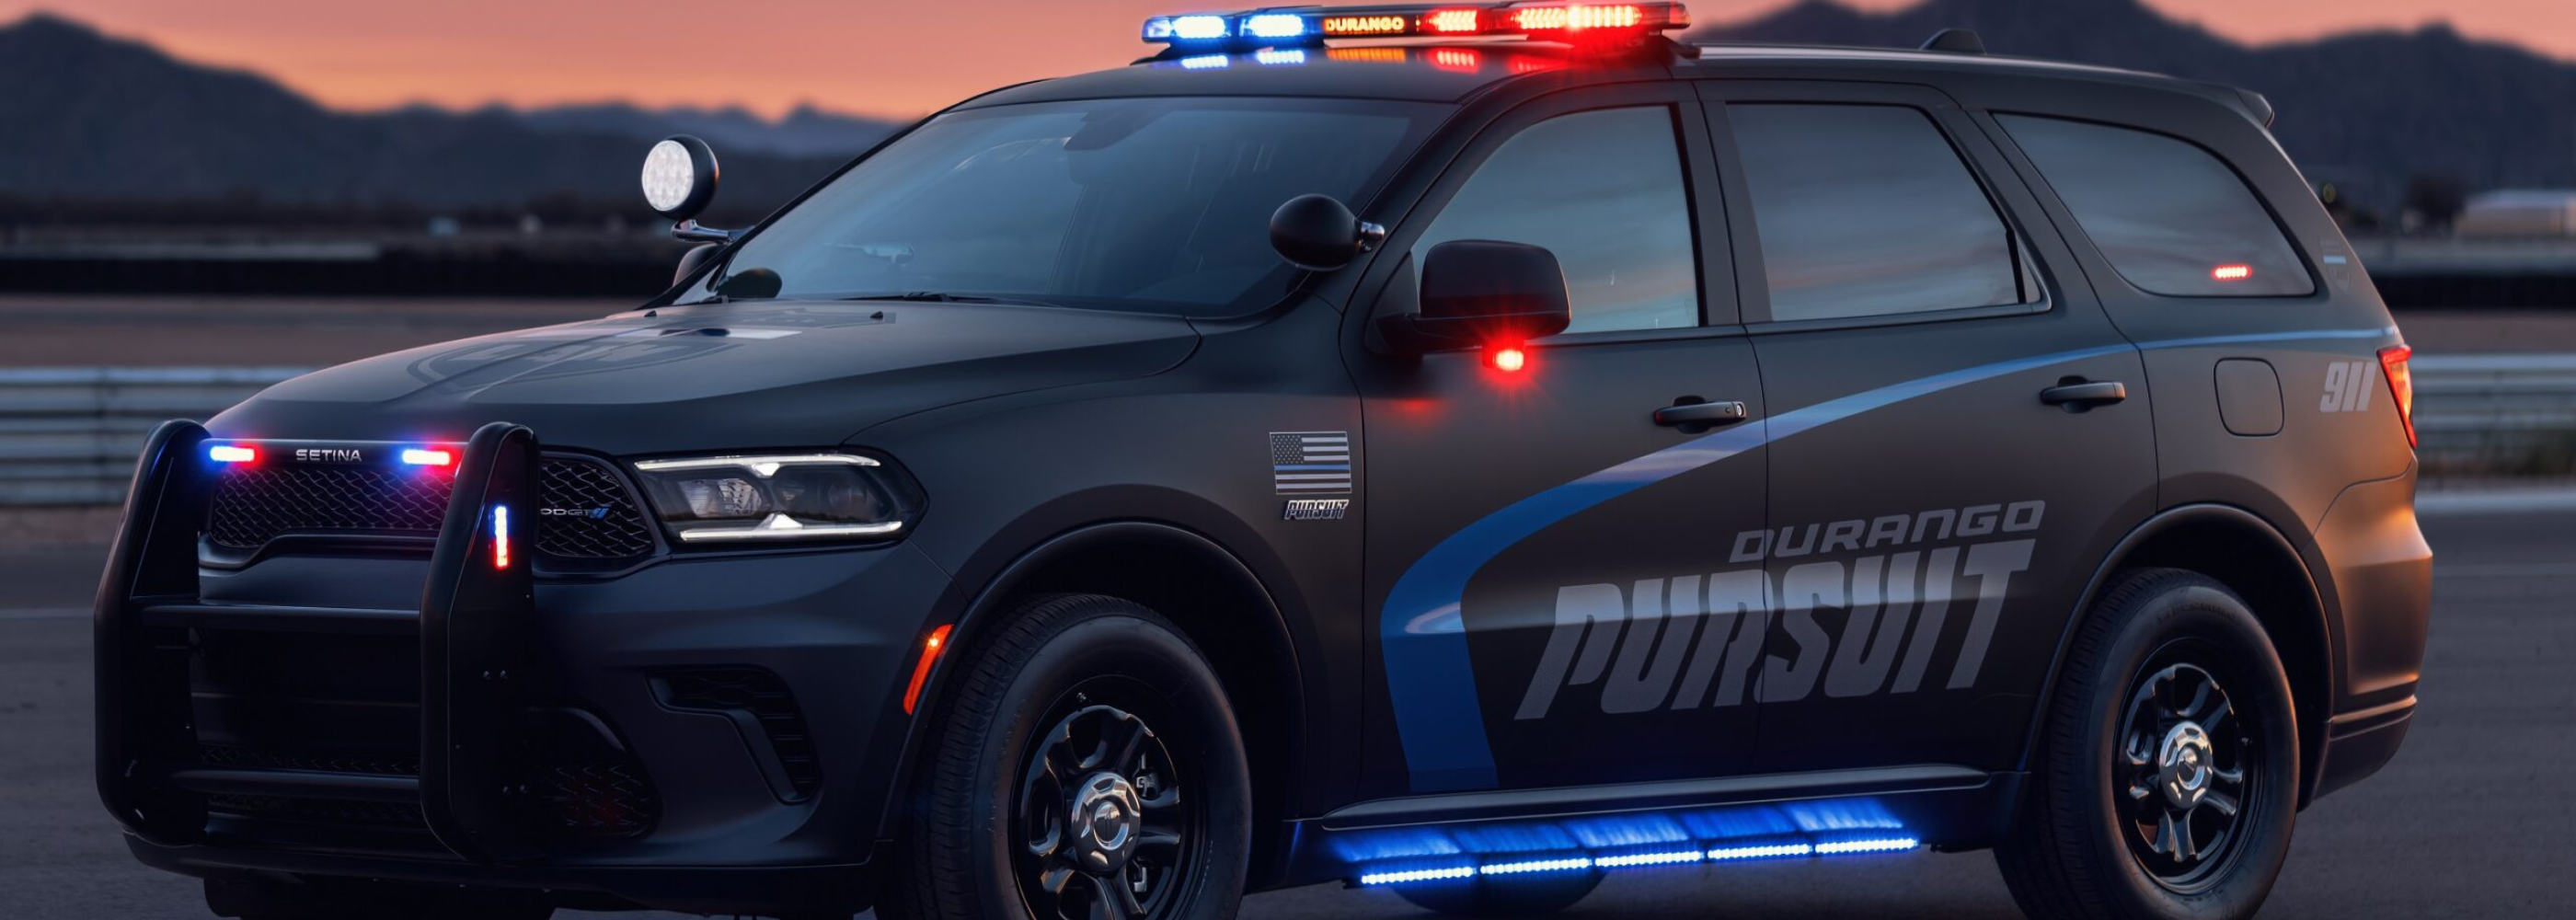 Specialized lithium batteries used in law enforcement equipment, known for their high energy density and reliable performance even under demanding conditions.